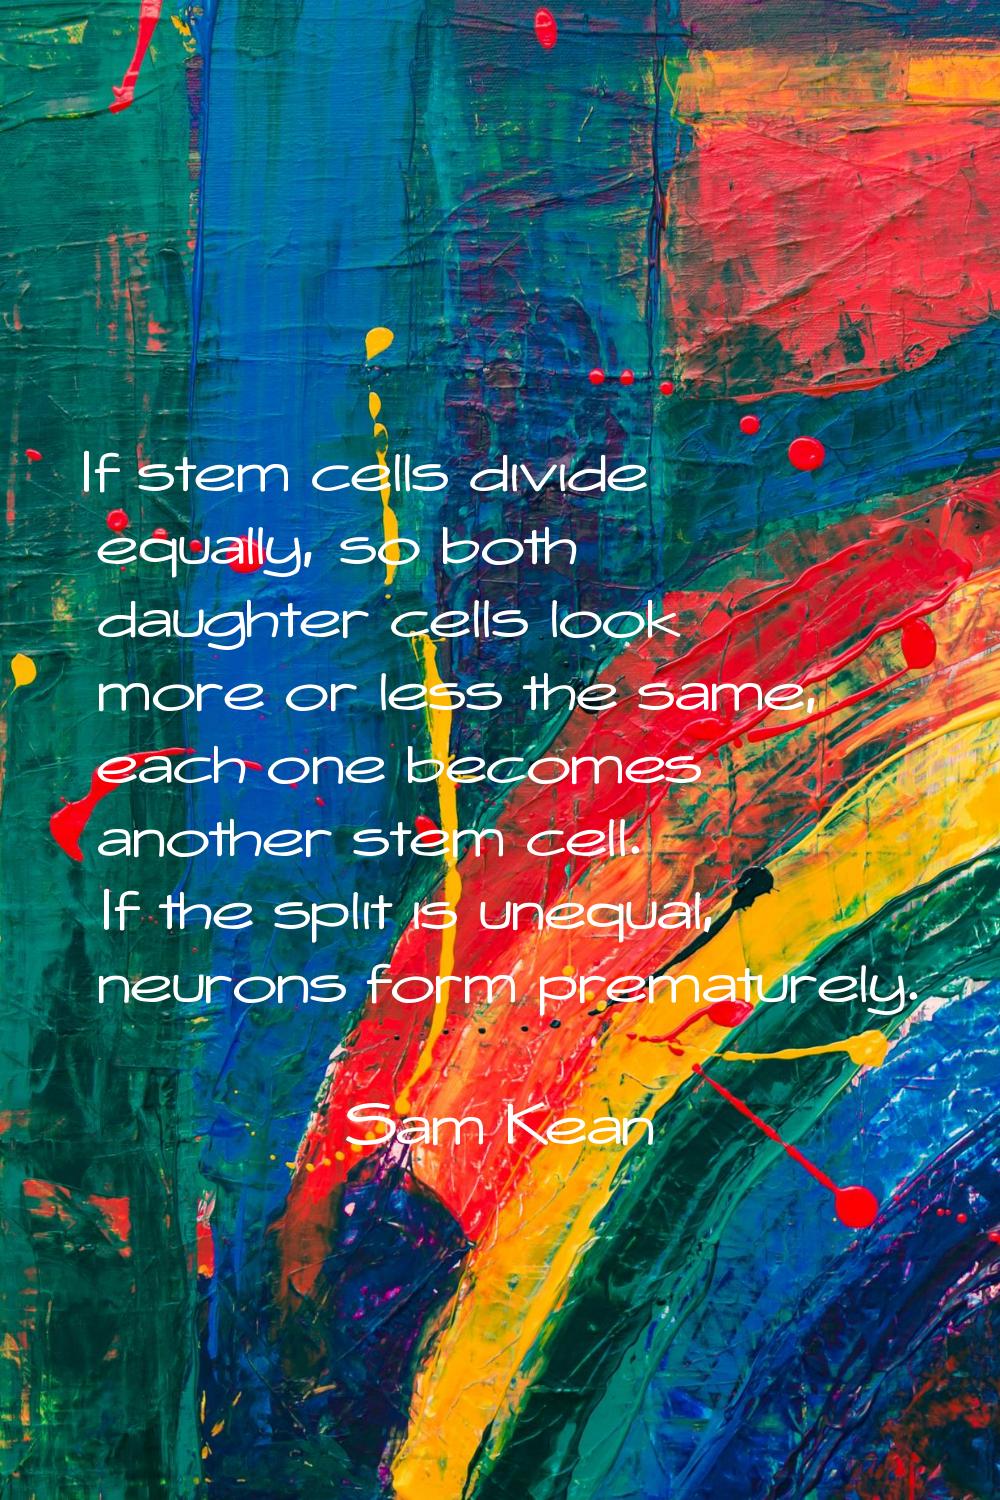 If stem cells divide equally, so both daughter cells look more or less the same, each one becomes a